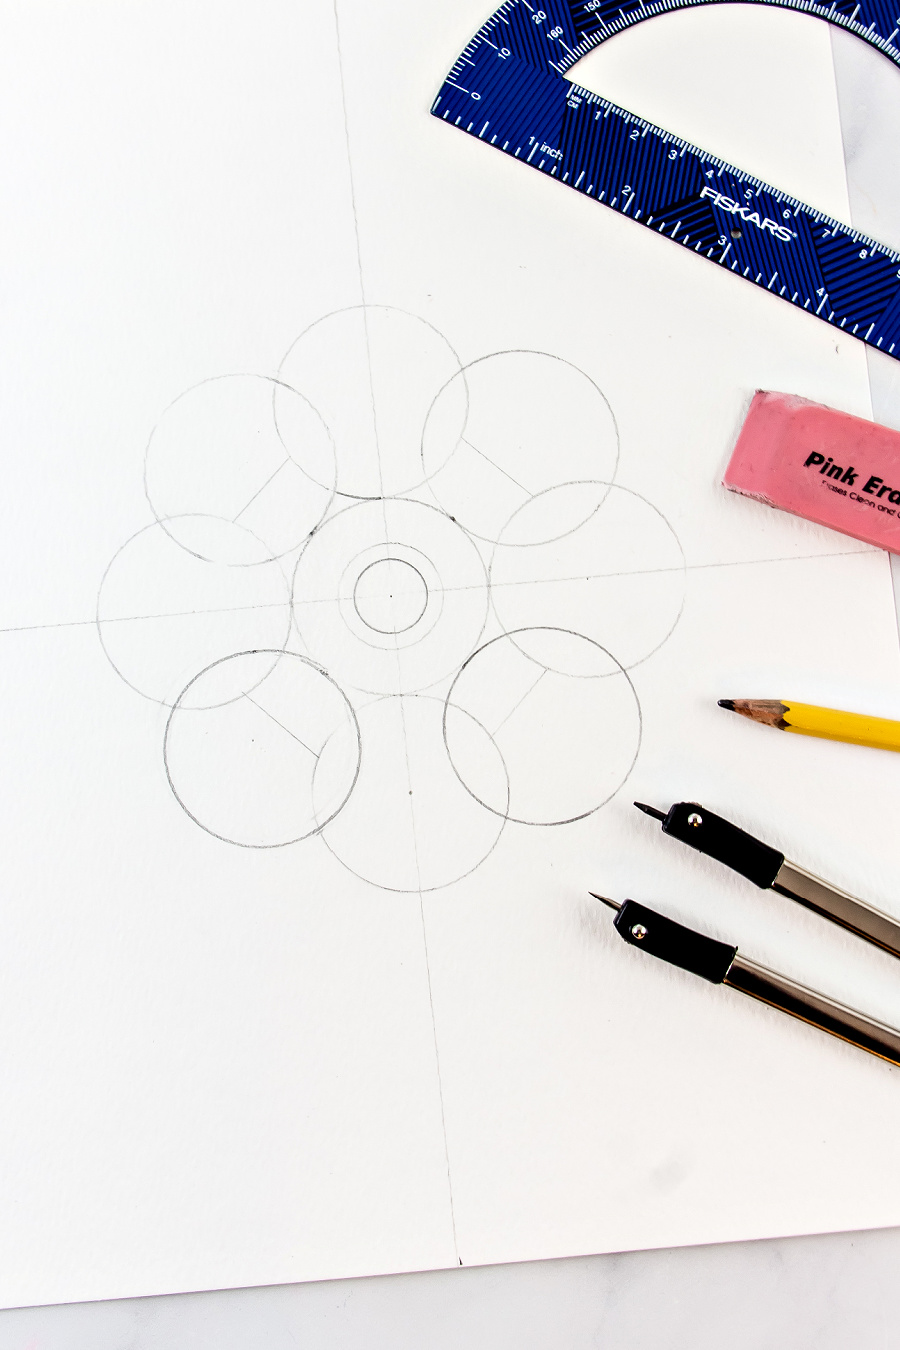 mandale drawing idea using circles for beginners